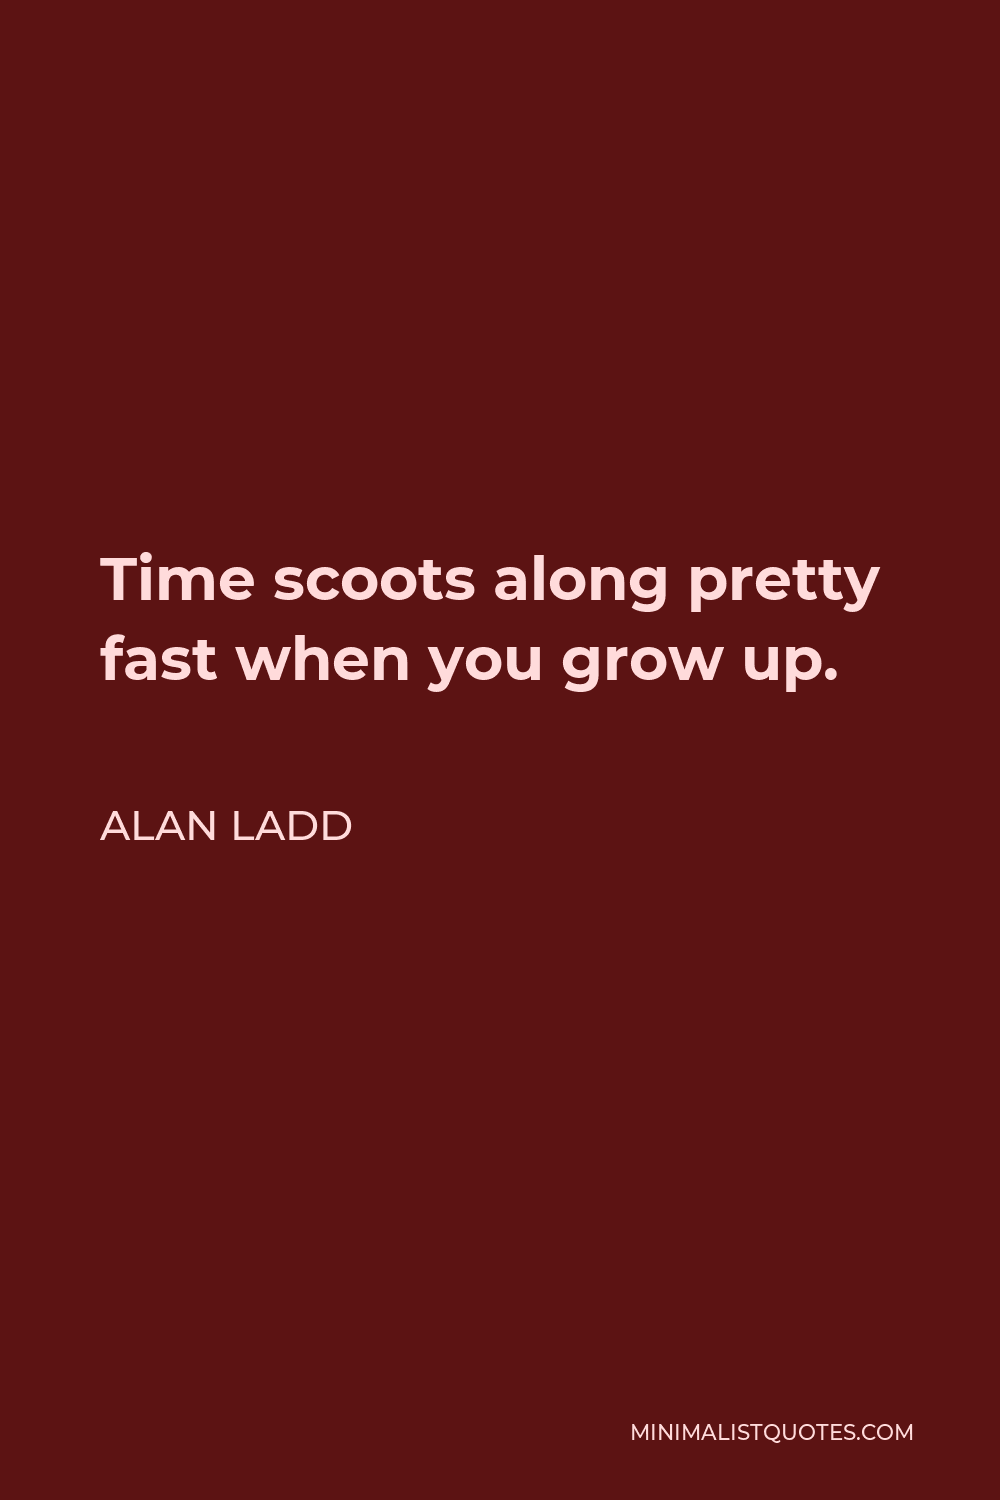 Alan Ladd Quote - Time scoots along pretty fast when you grow up.